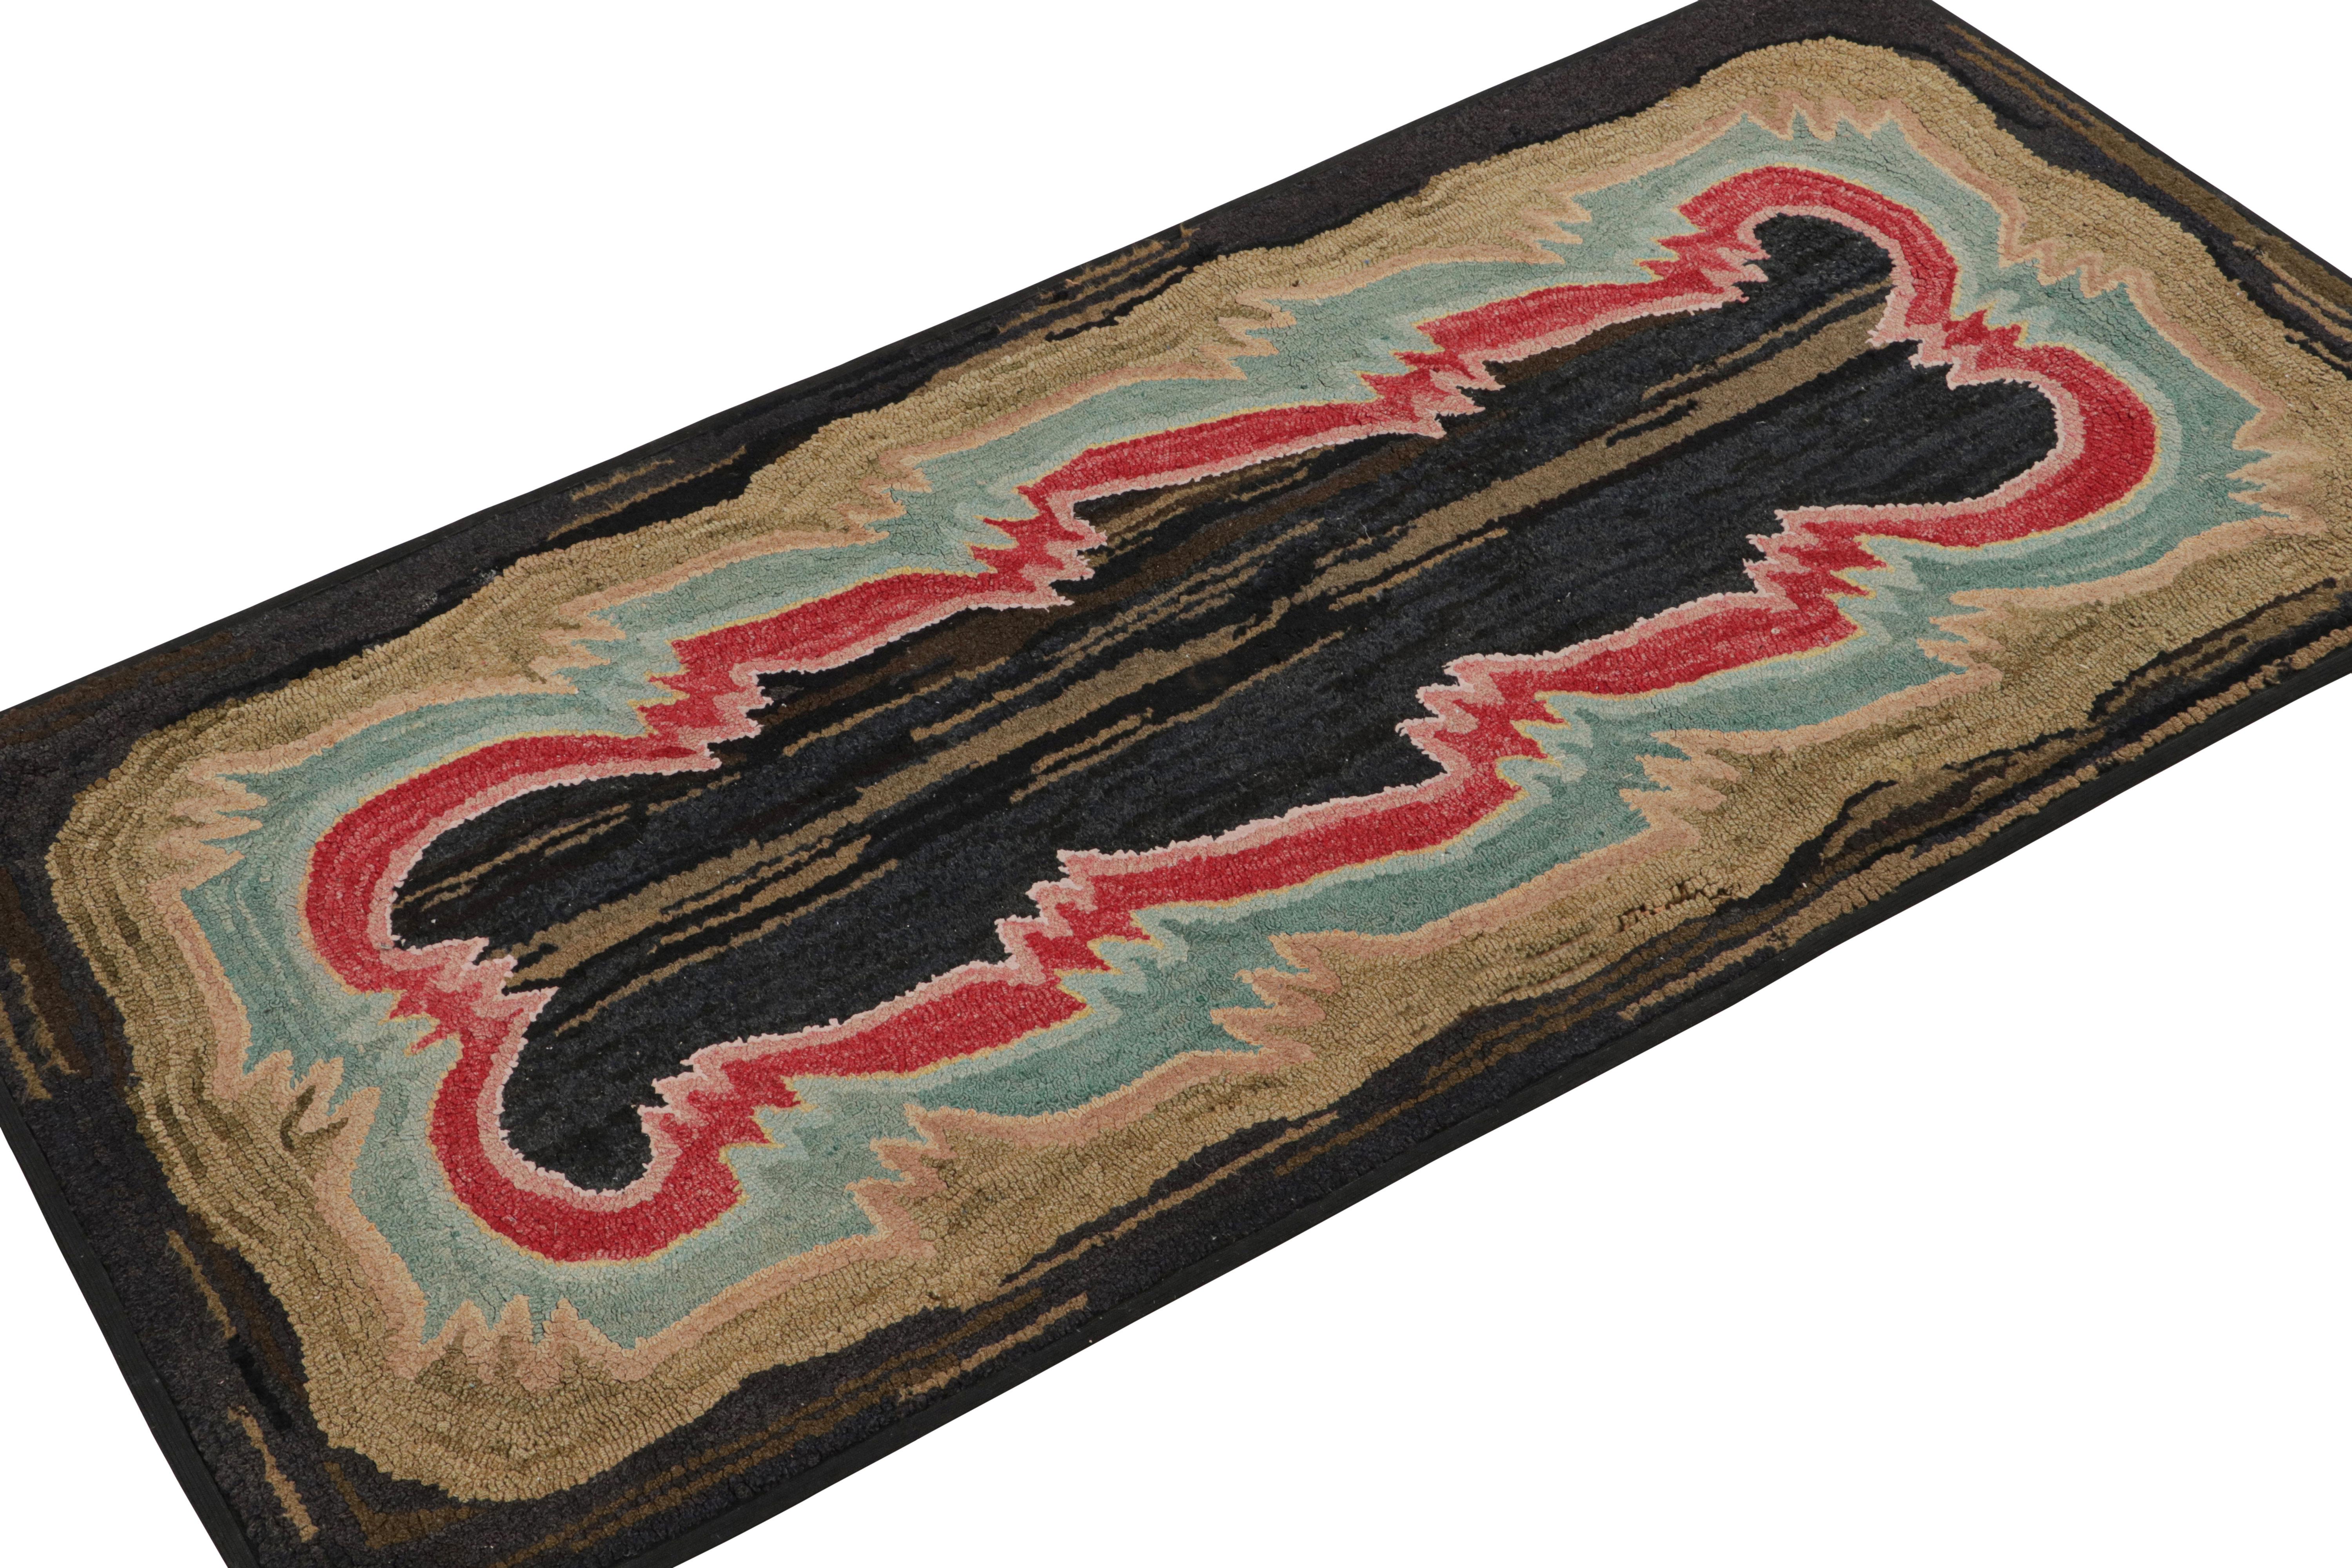 A rare 2x4 antique hooked rug of United States provenance, handmade in wool and fabric circa 1920-1930. 

On the Design: 

This collectible piece enjoys layered geometric borders in bright colors against rich brown and dark blue tones. Admirers of